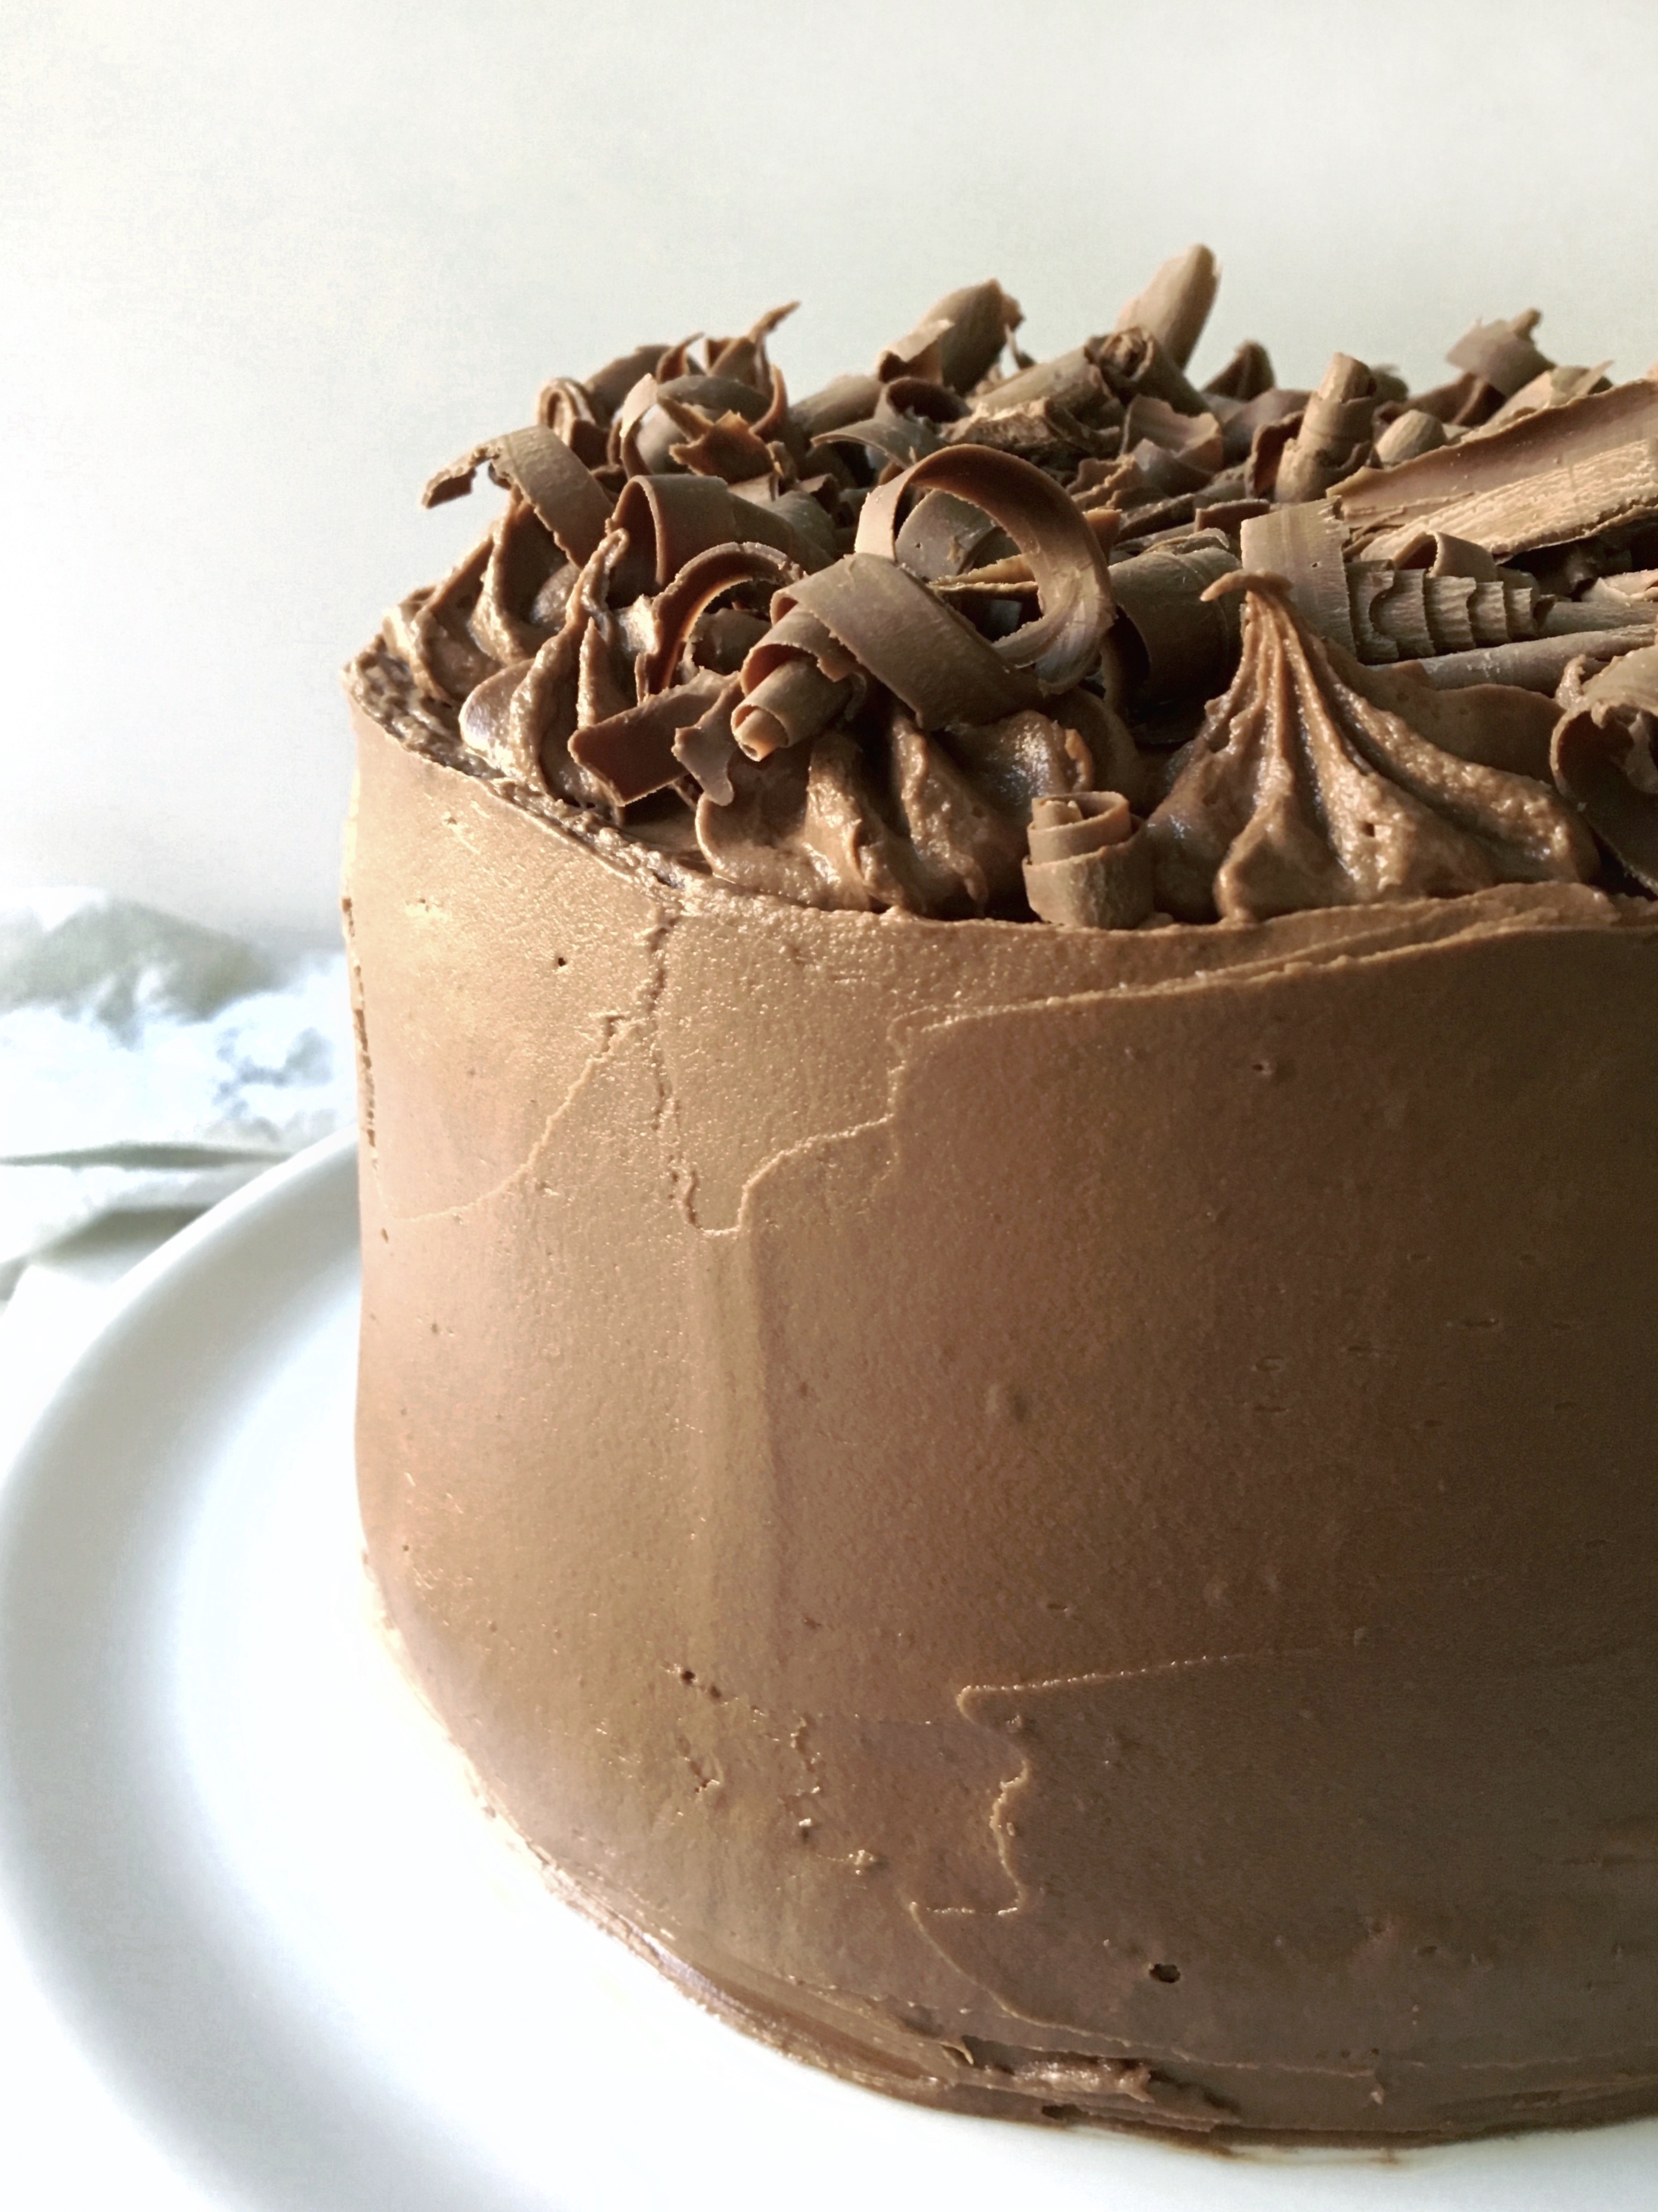 chocolate fudge frosting spread over a 3 layer cake